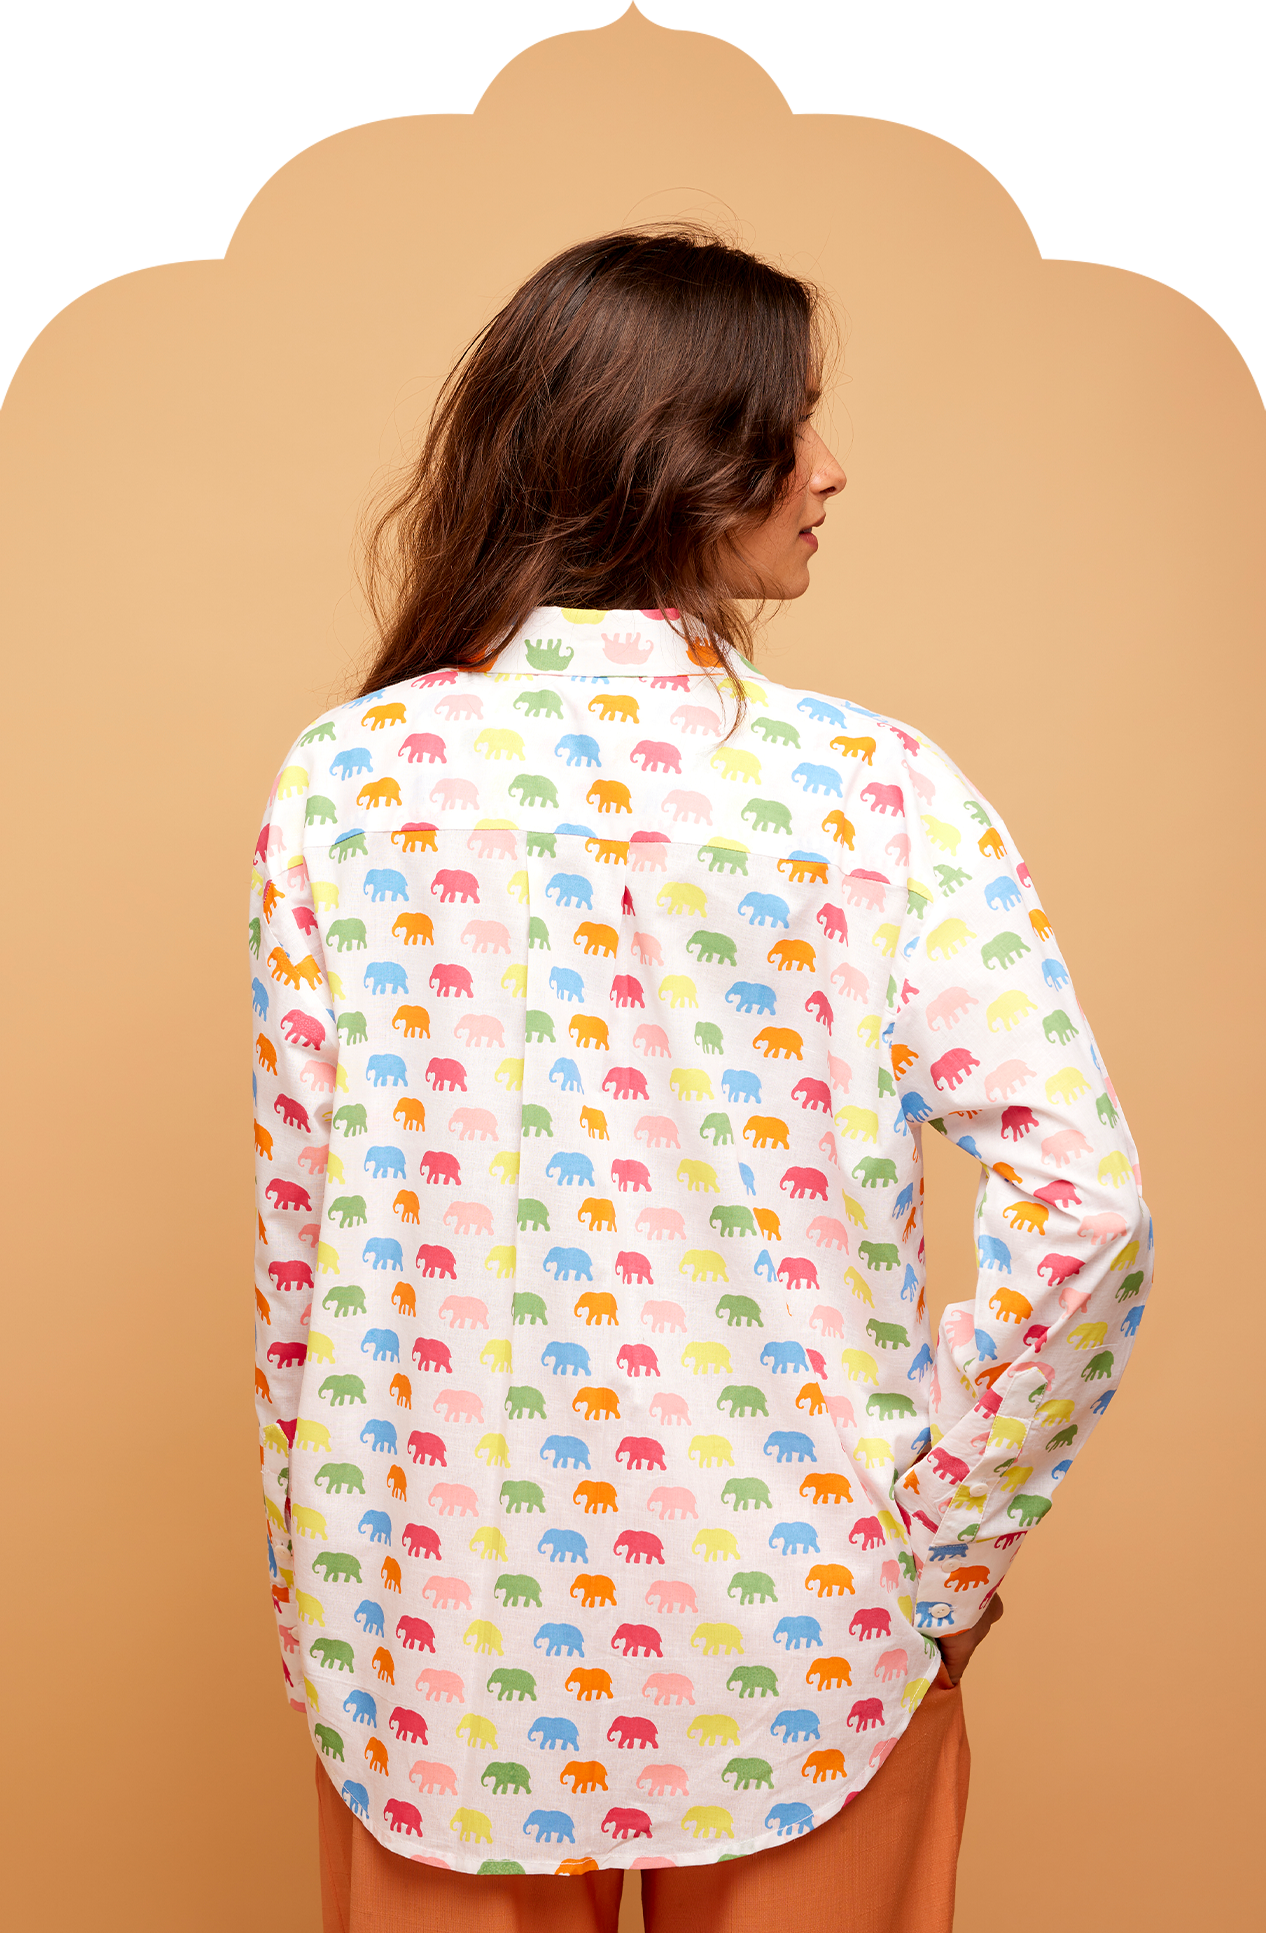 Women's White Shirt with Marching Elephant Print